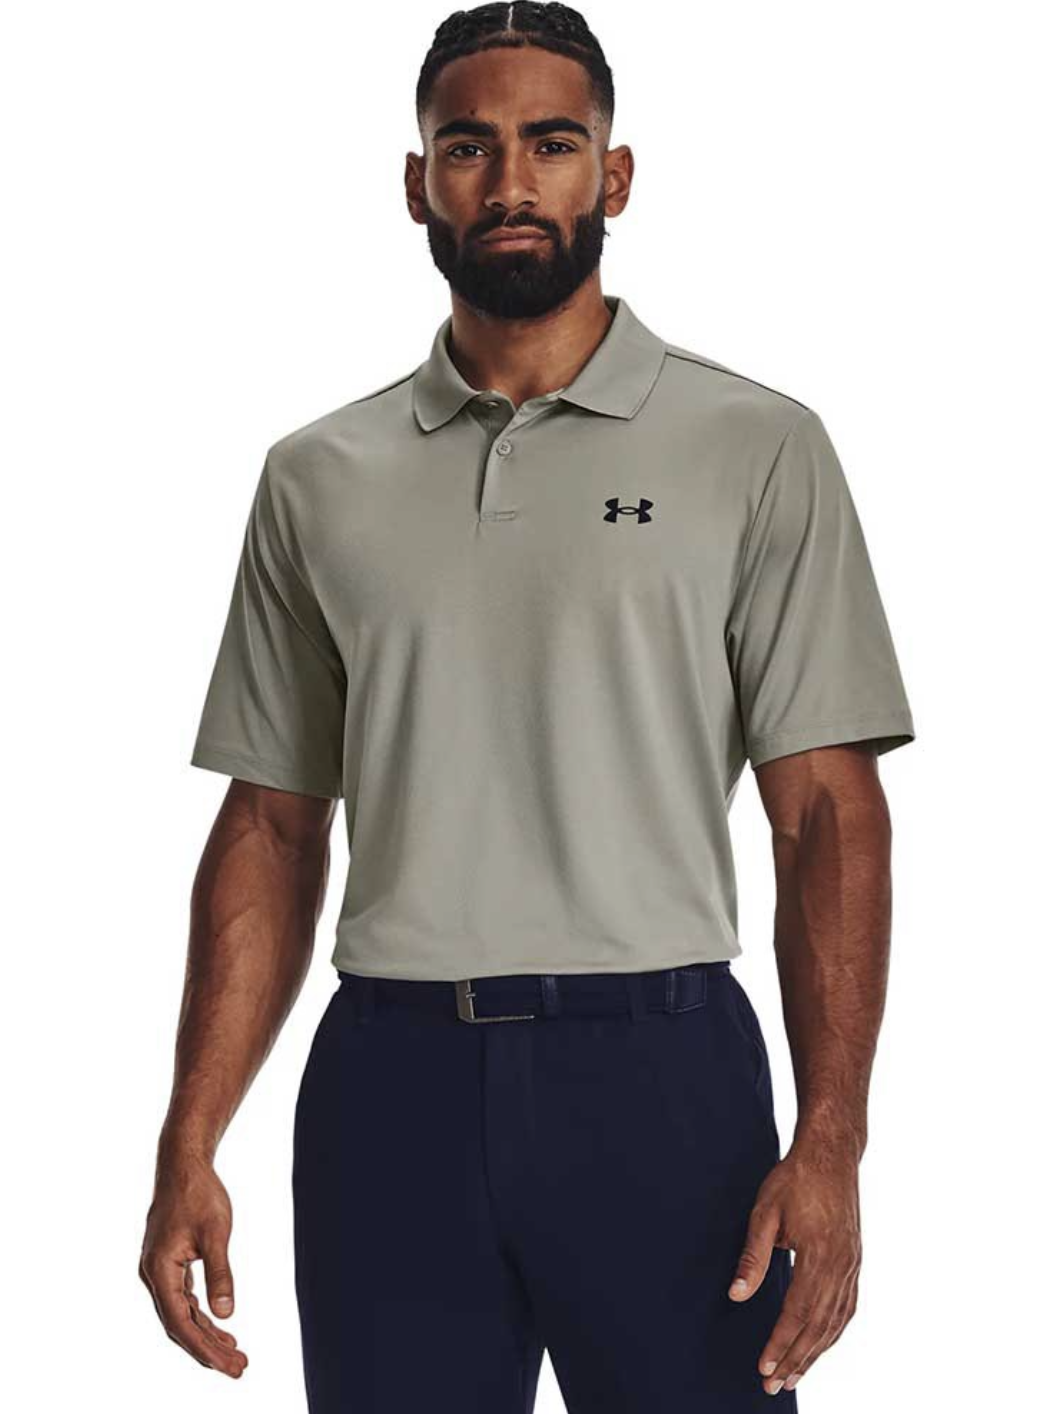 Under Armour | 1377374-504 | Performance 3.0 Polo | Groove Green / Midnight Navy